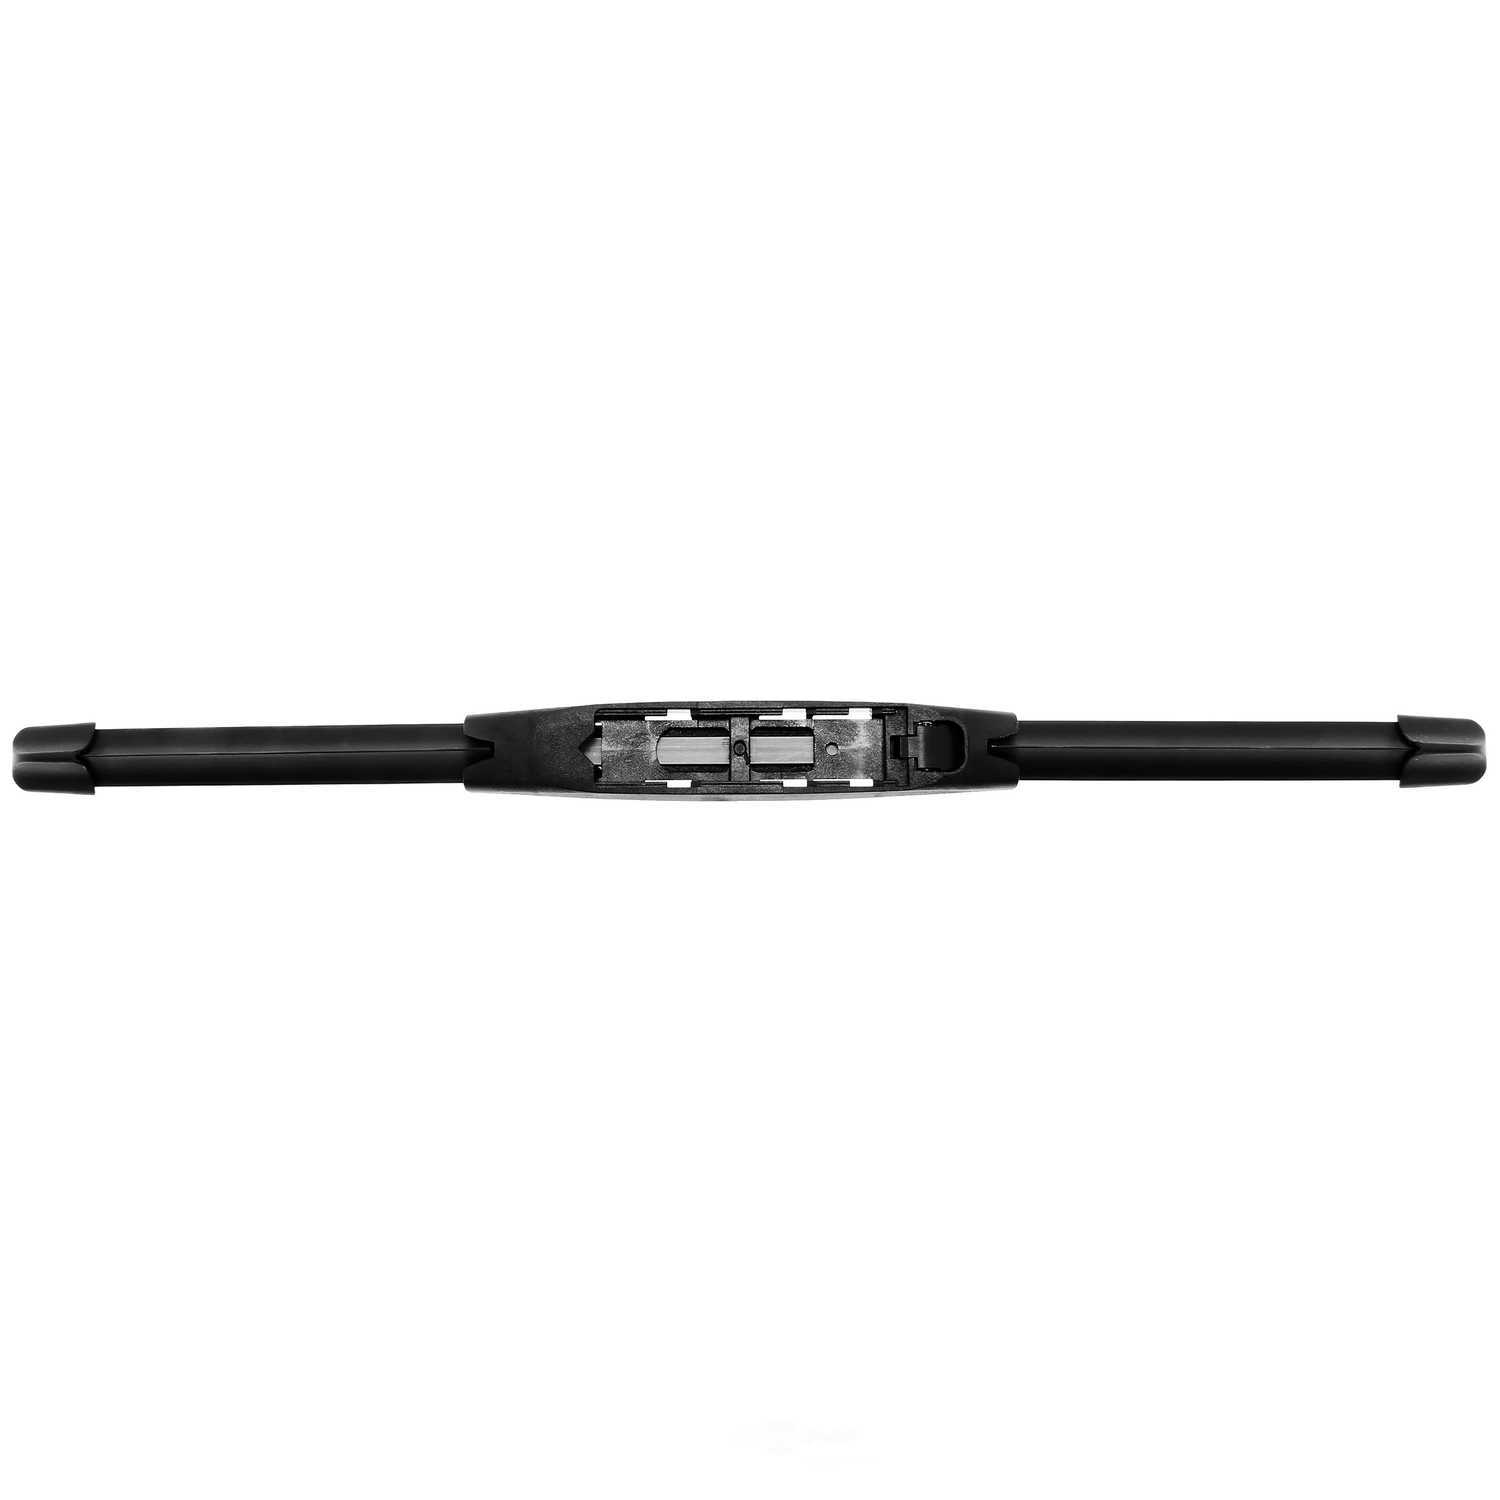 ACDELCO GOLD/PROFESSIONAL - Beam Wiper Blade - DCC 8-91515